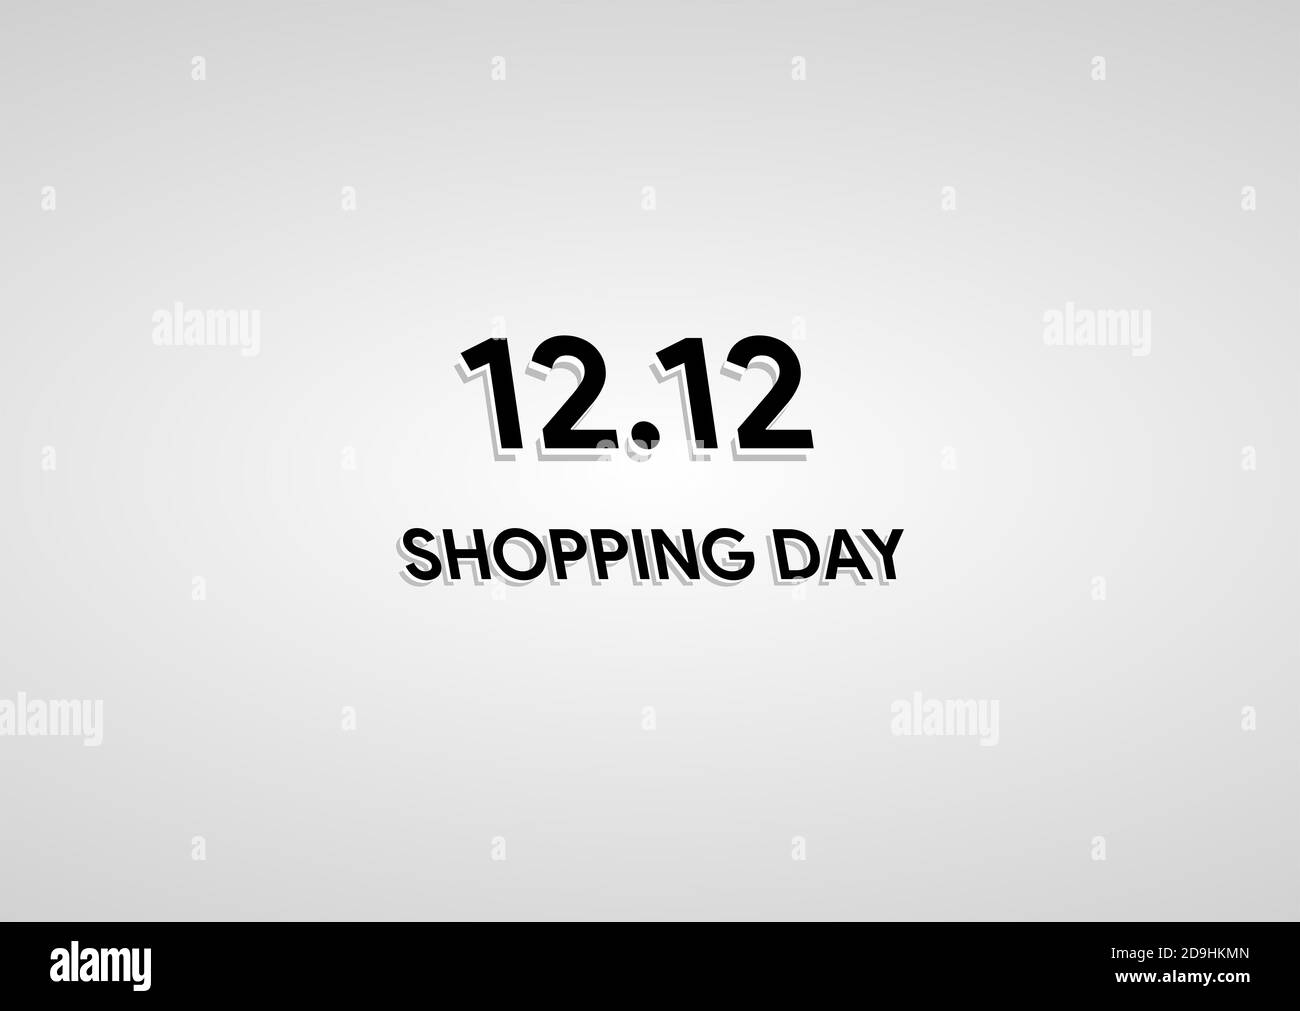 12.12 Shopping day sale poster or flyer design. Global shopping world day Sale on minimalist background. 12.12 Crazy sales online. Stock Photo